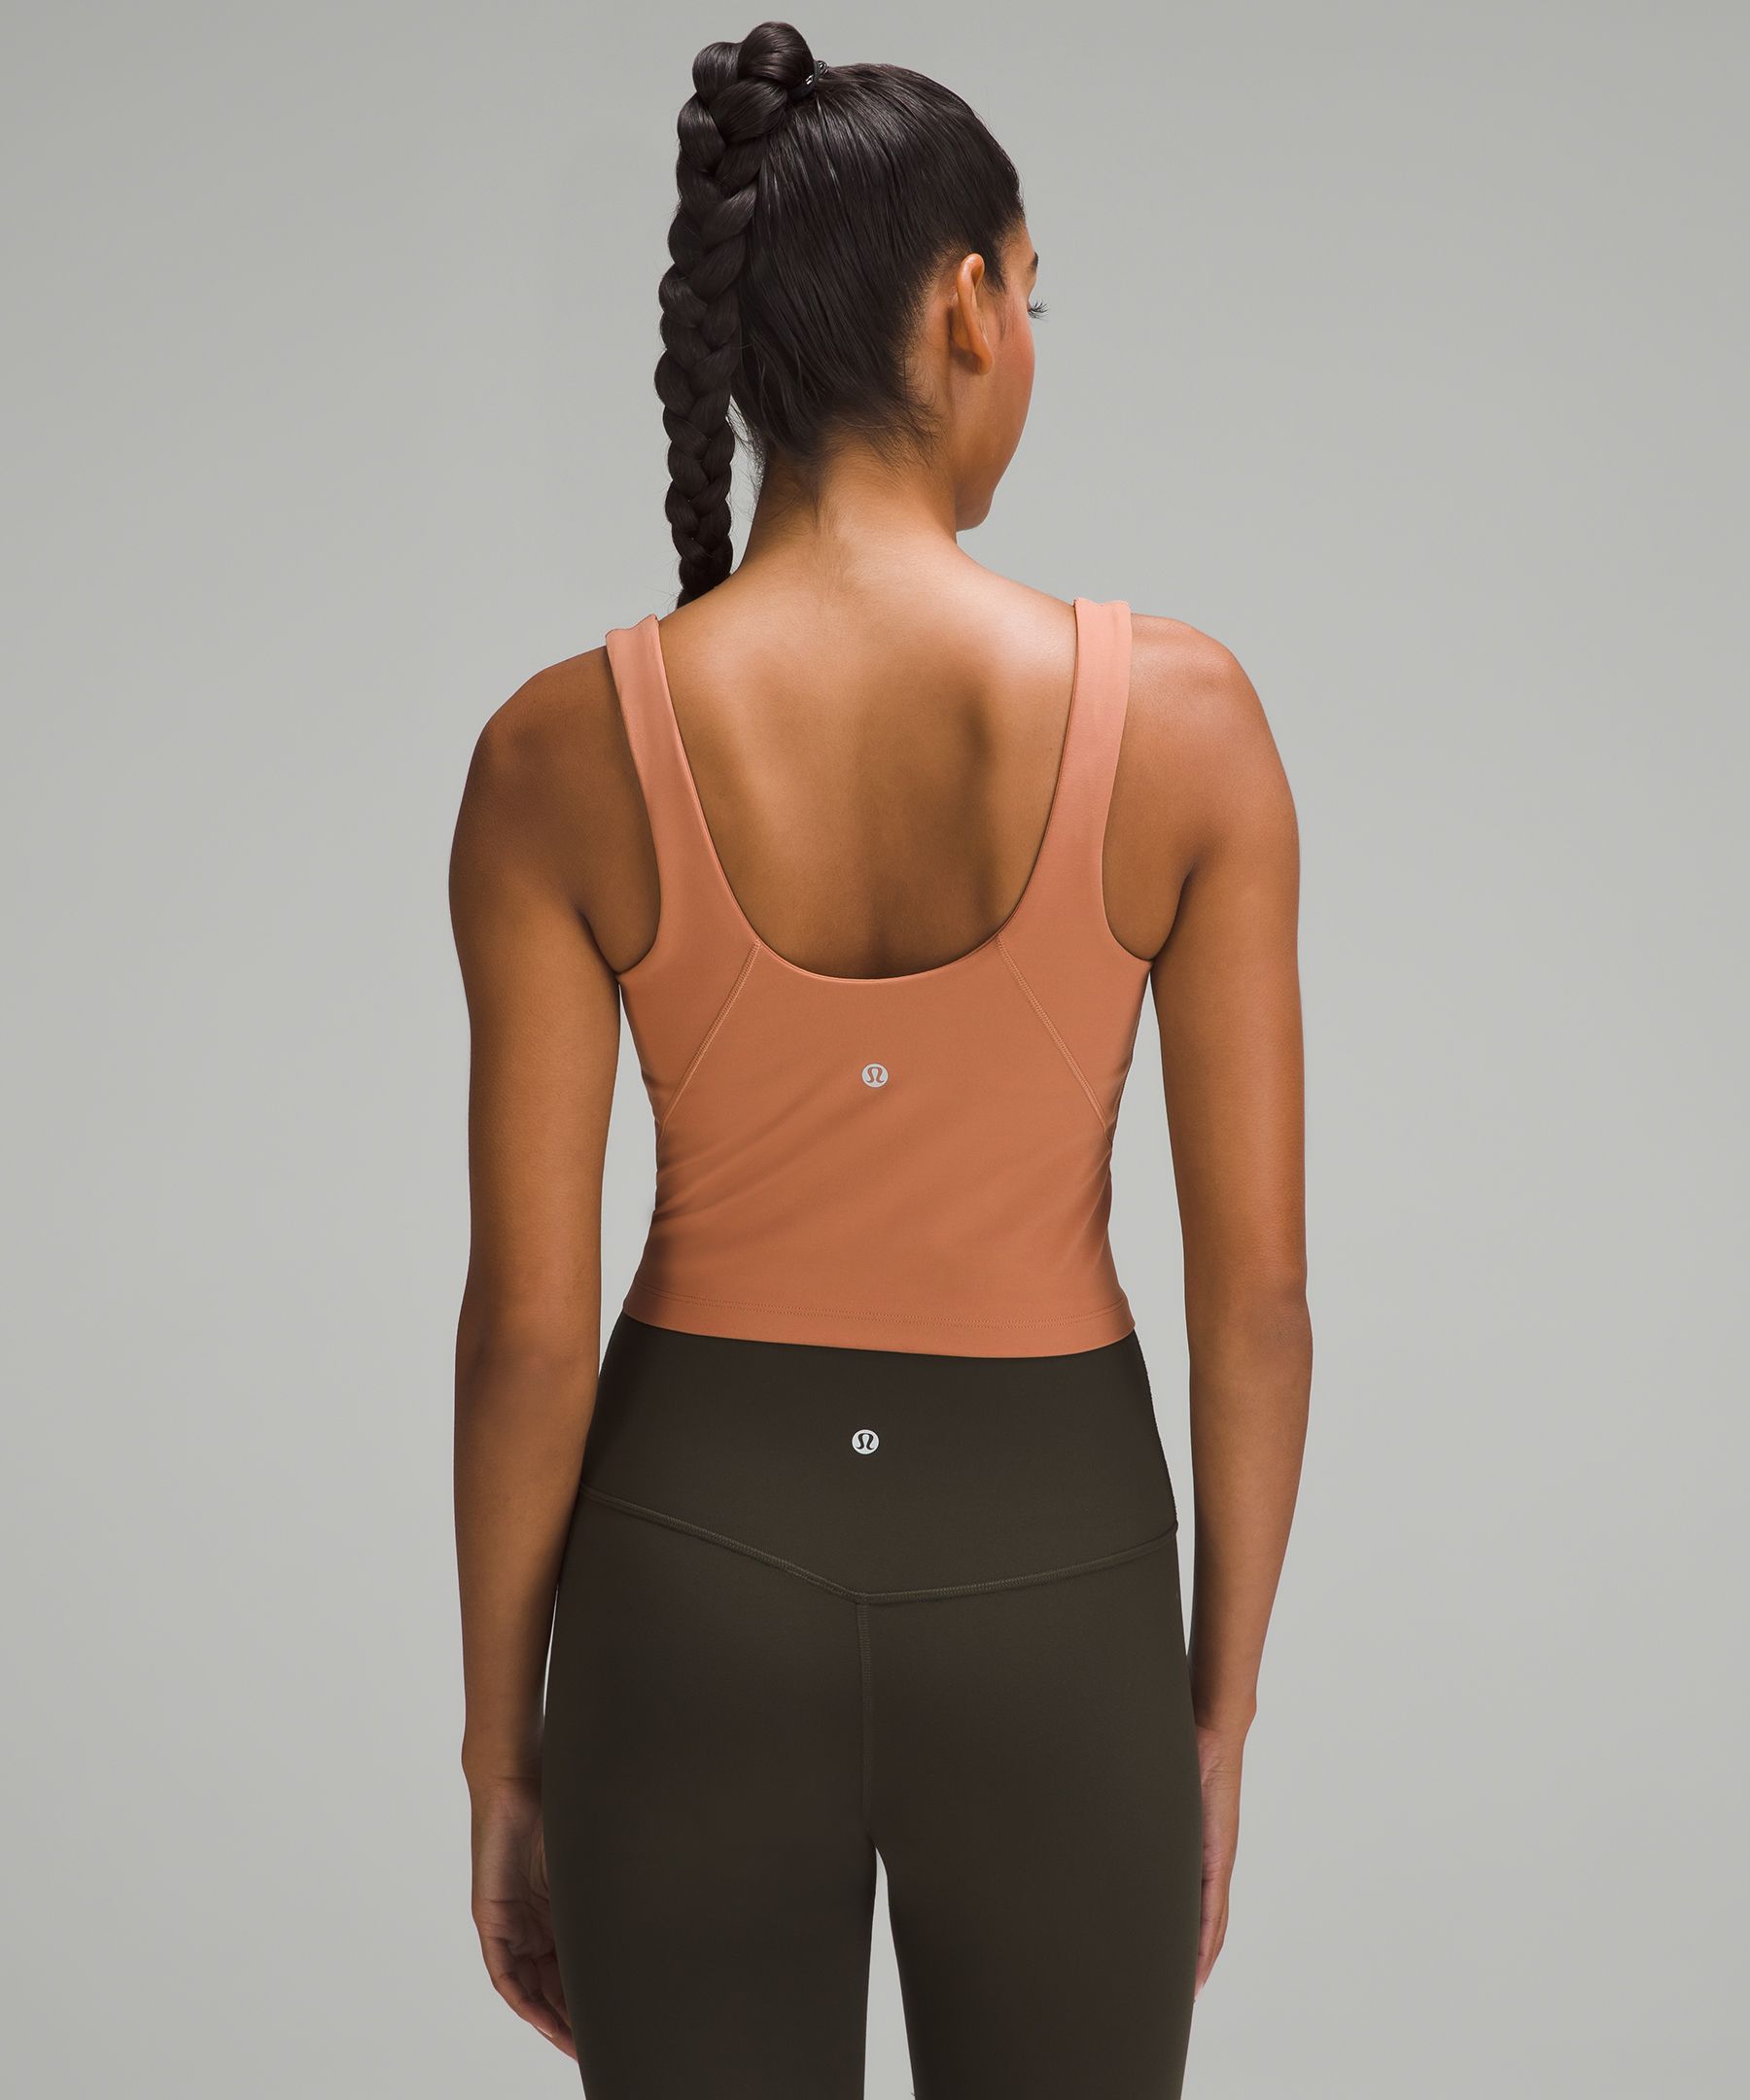 Lululemon Camo Align Tank Size 2 - $50 (26% Off Retail) - From Andra